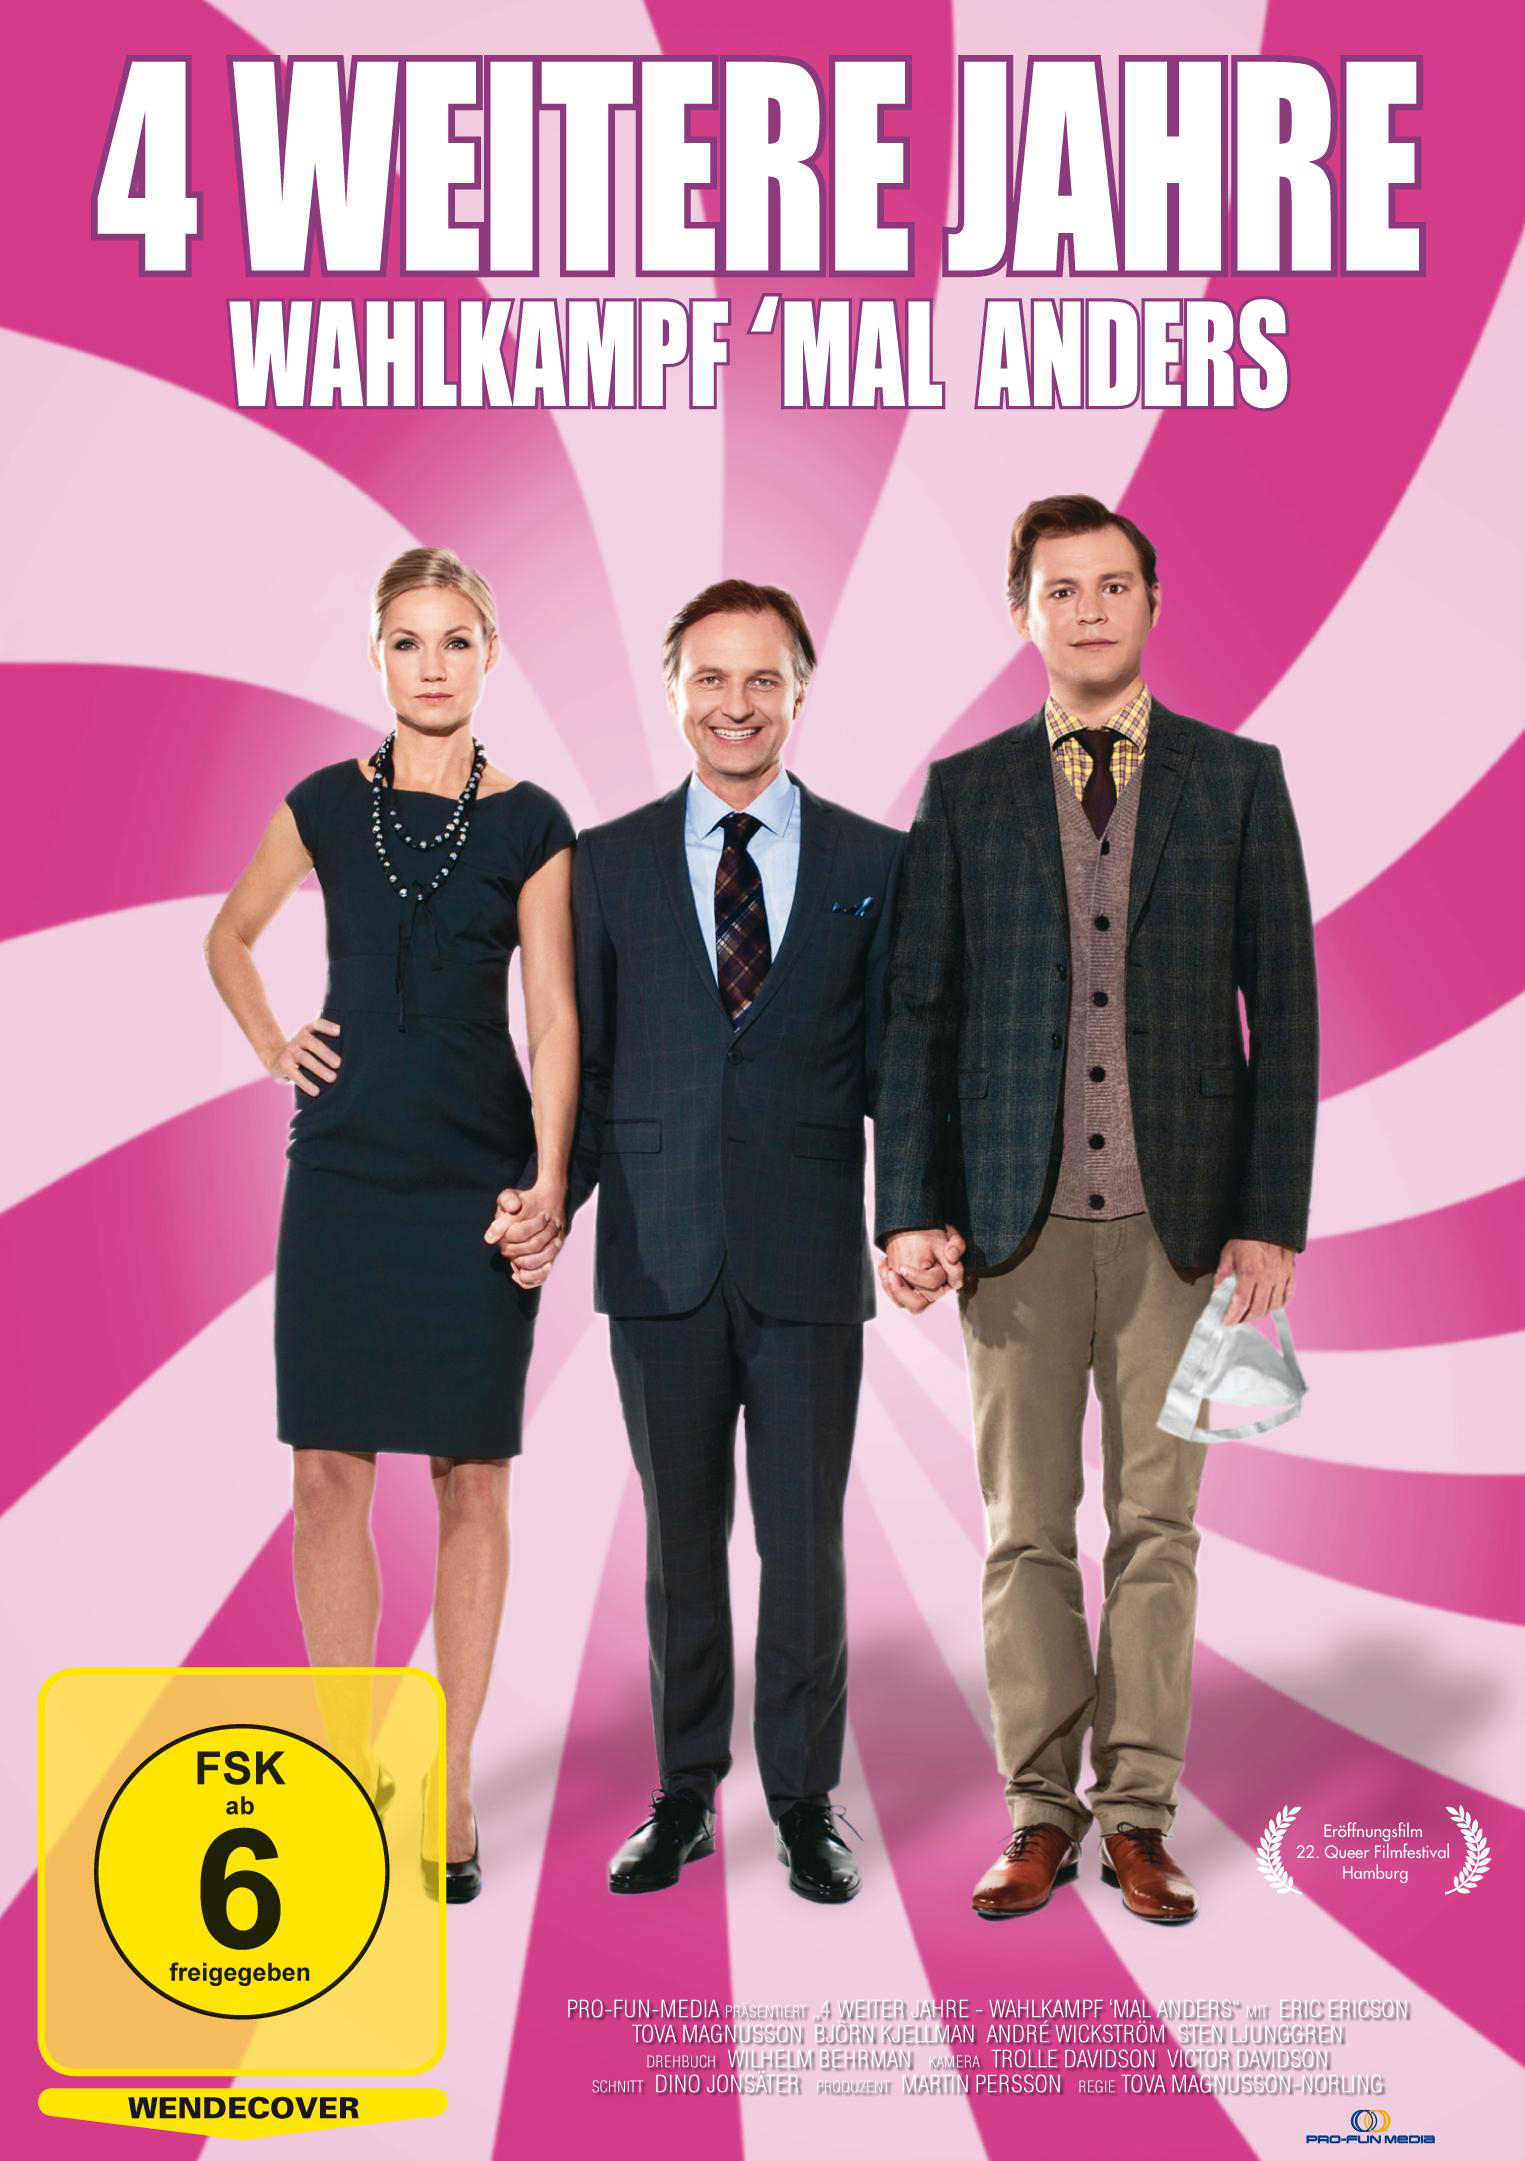 4 weitere Jahre \'mal DVD anders - Wahlkampf